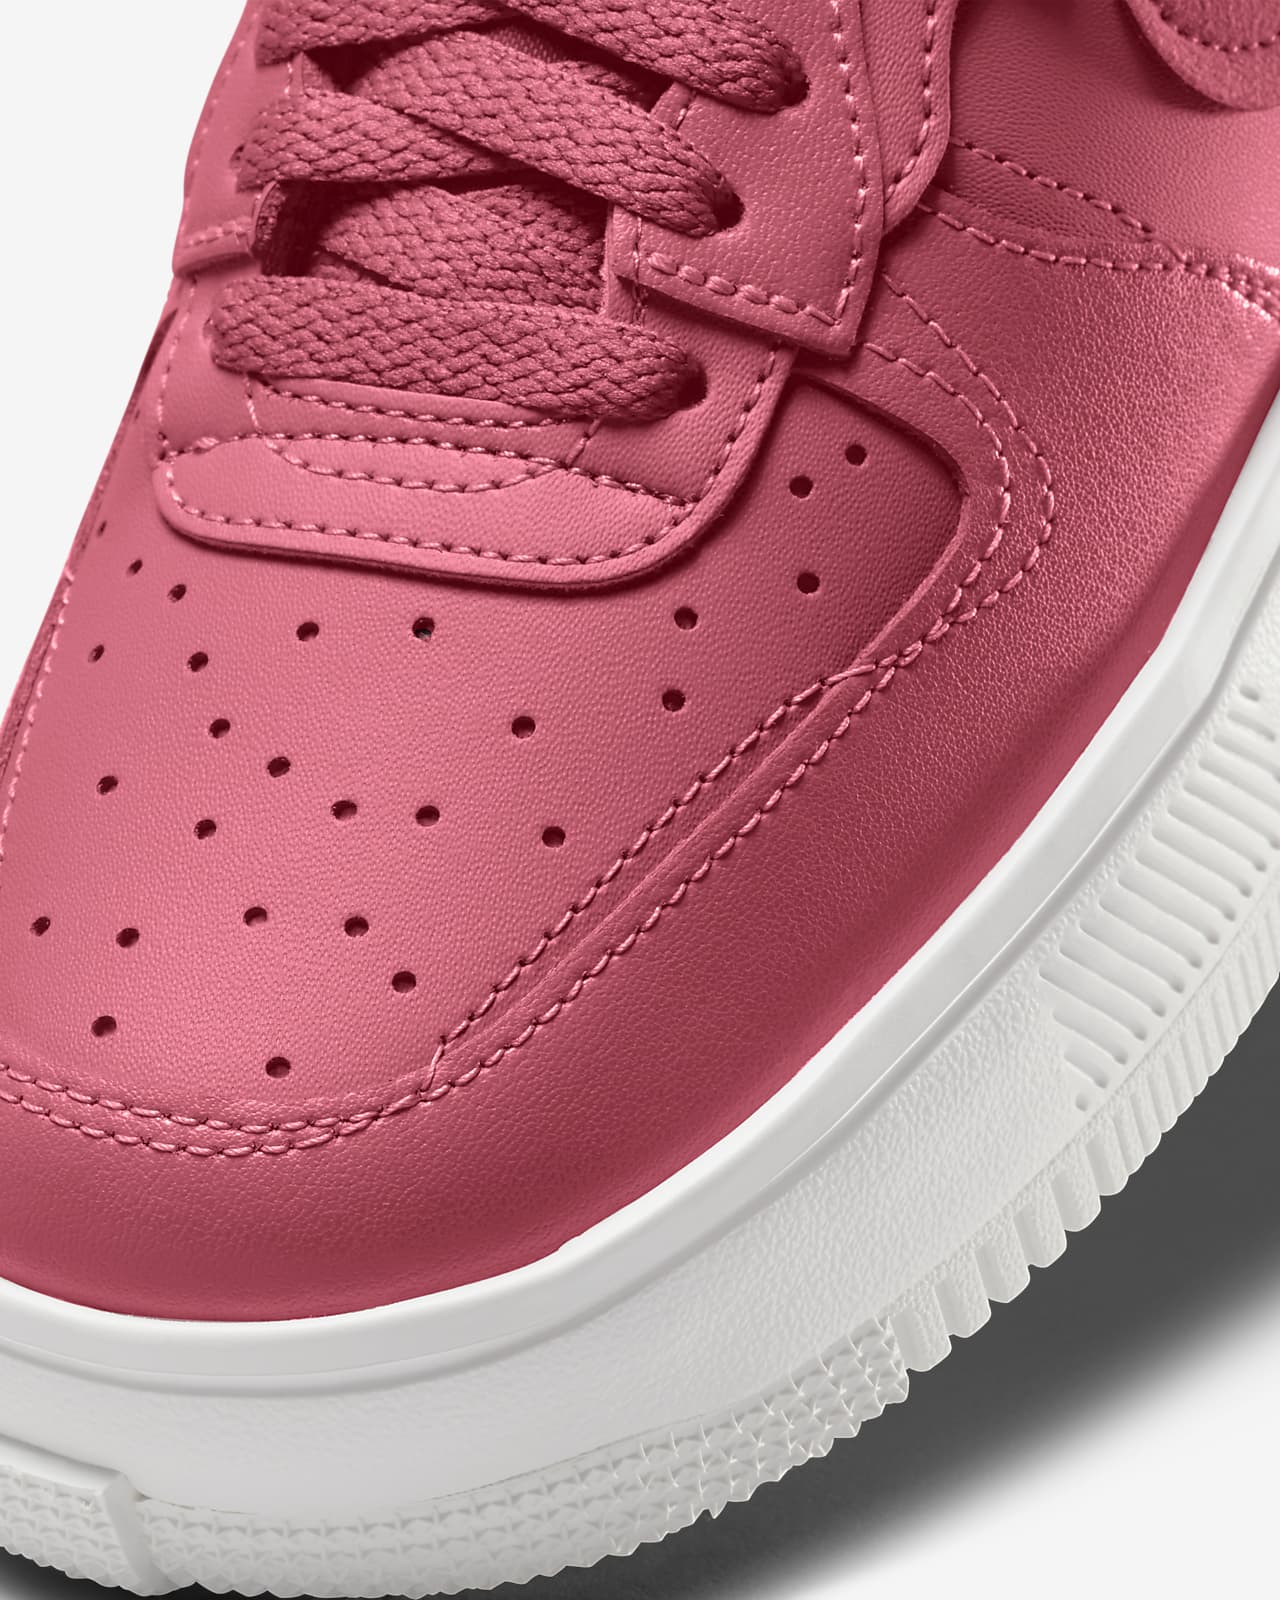 chaussure nike air force 1 femme rose